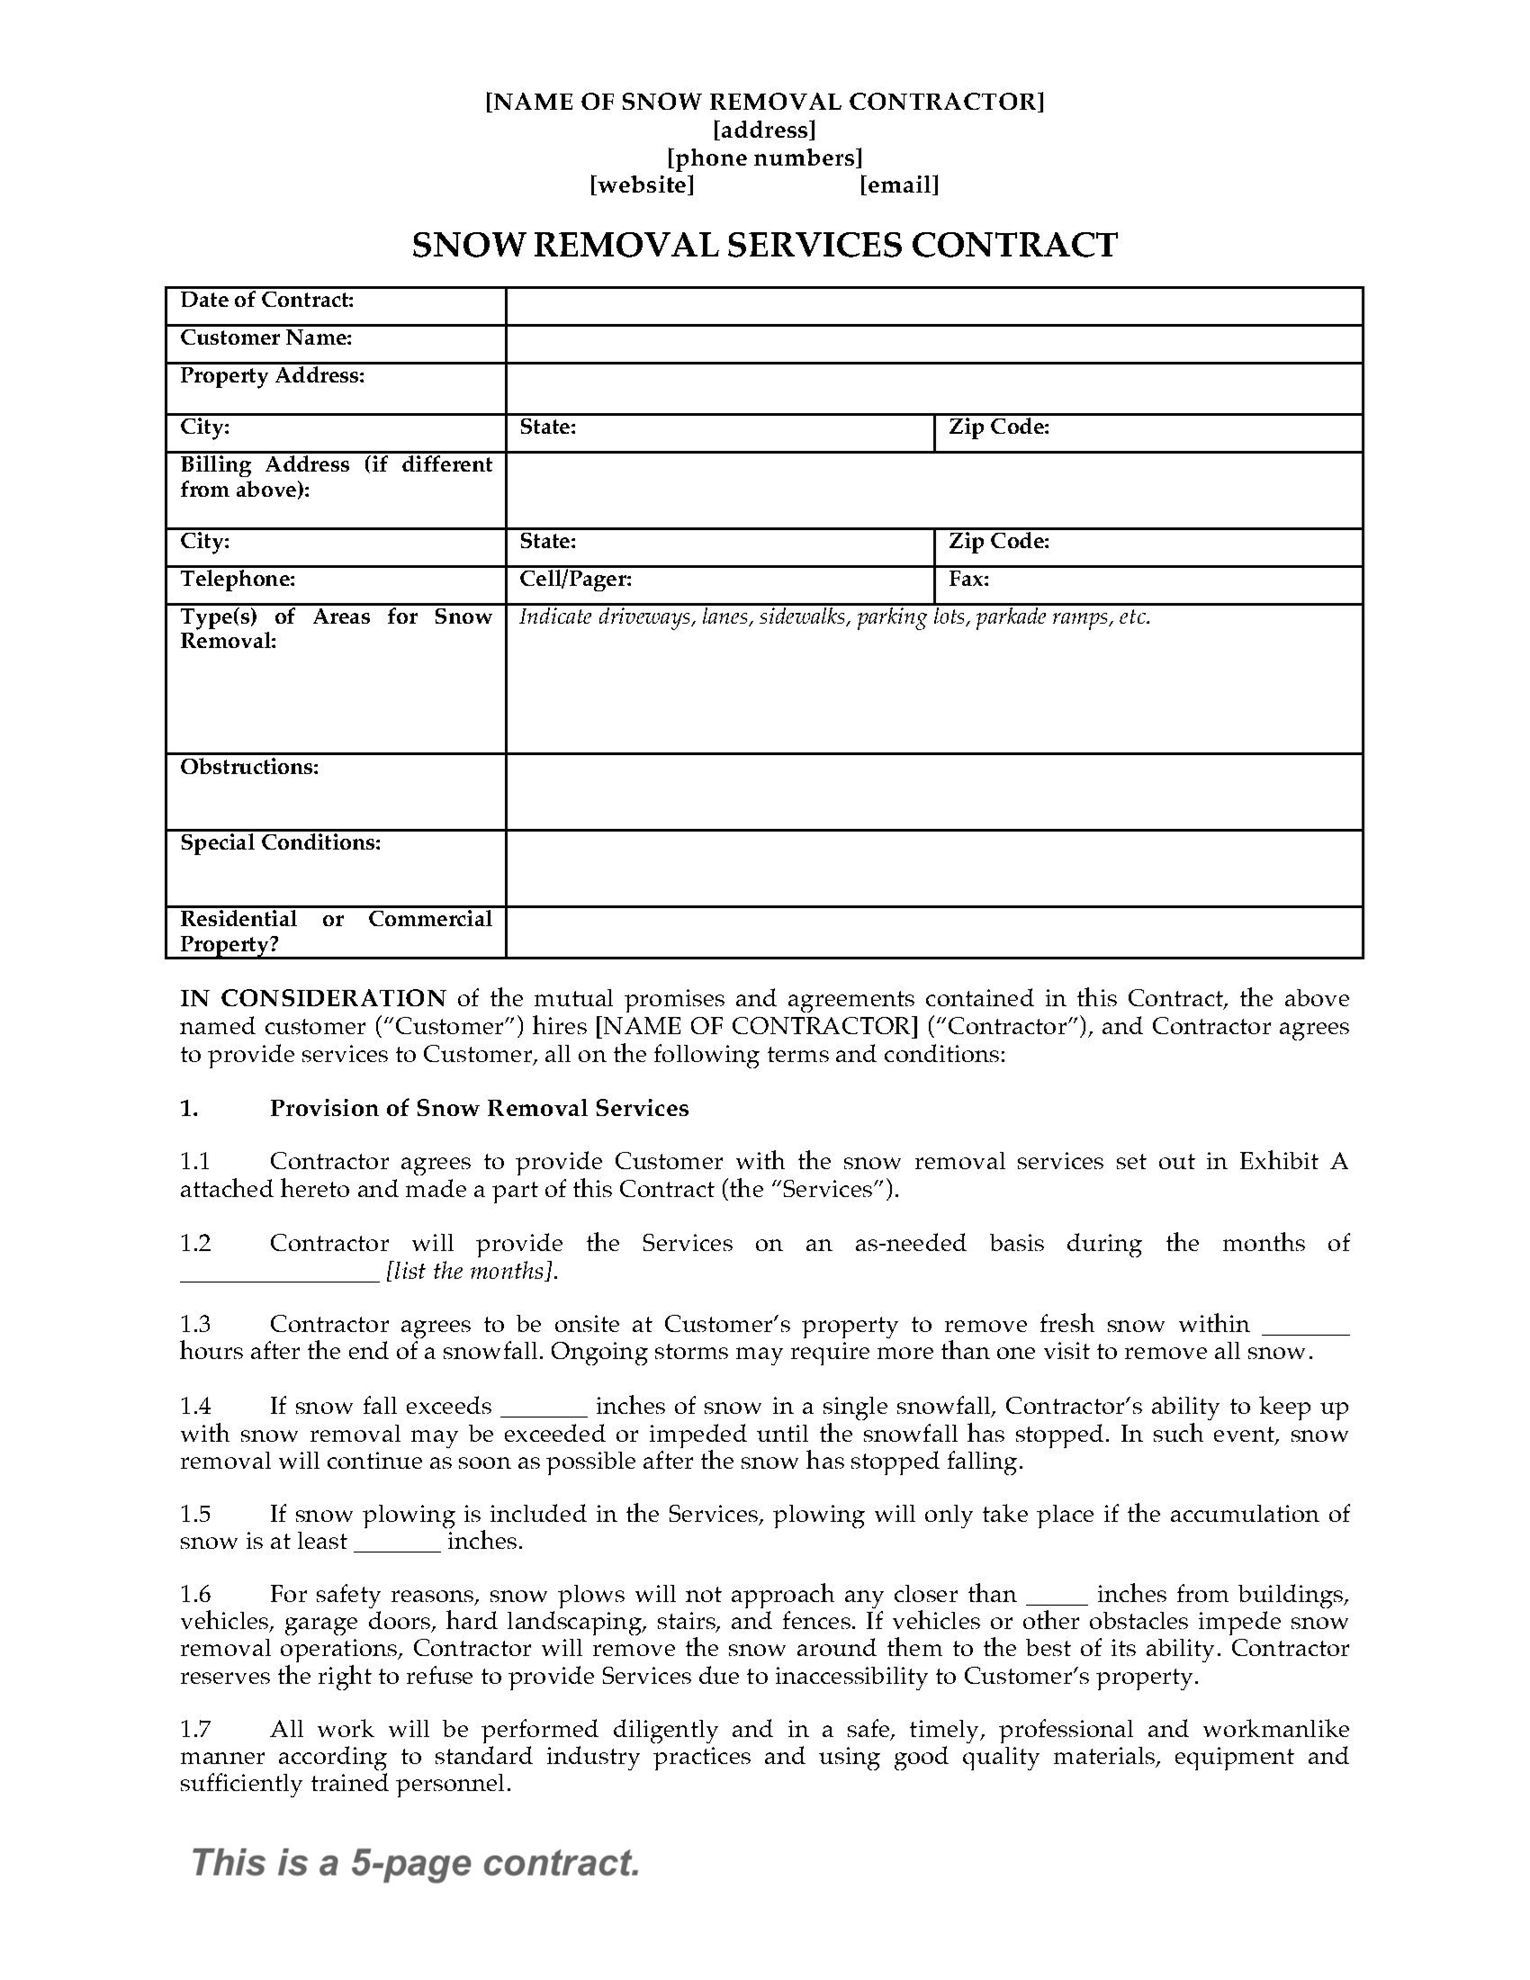 Landscaping Service Agreement Snow Removal Contract Form